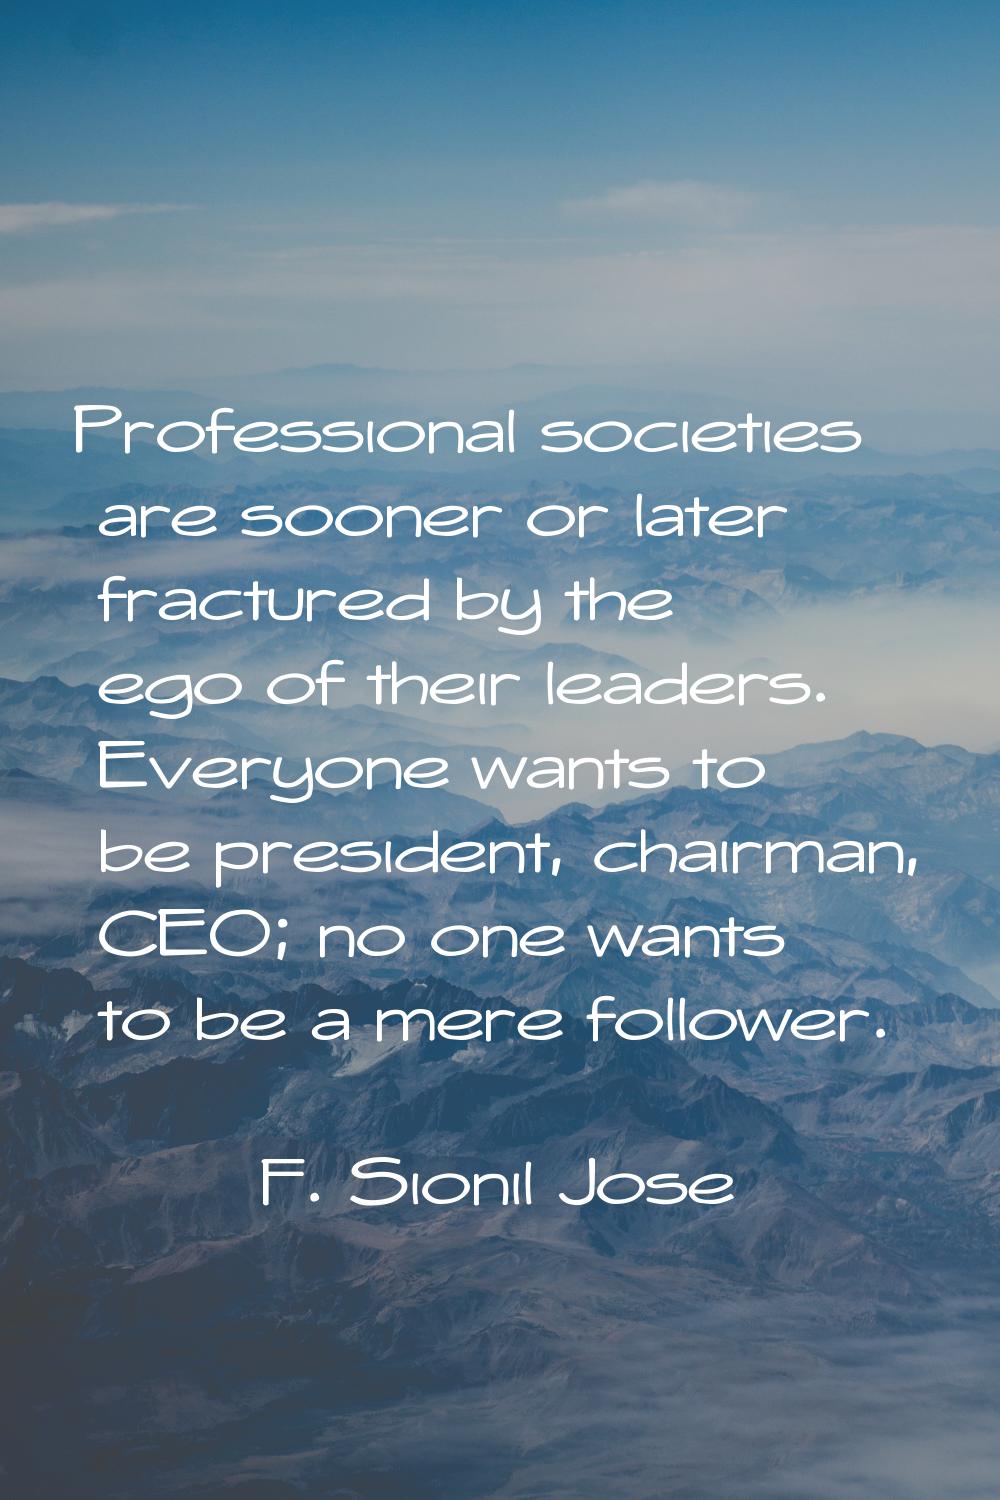 Professional societies are sooner or later fractured by the ego of their leaders. Everyone wants to